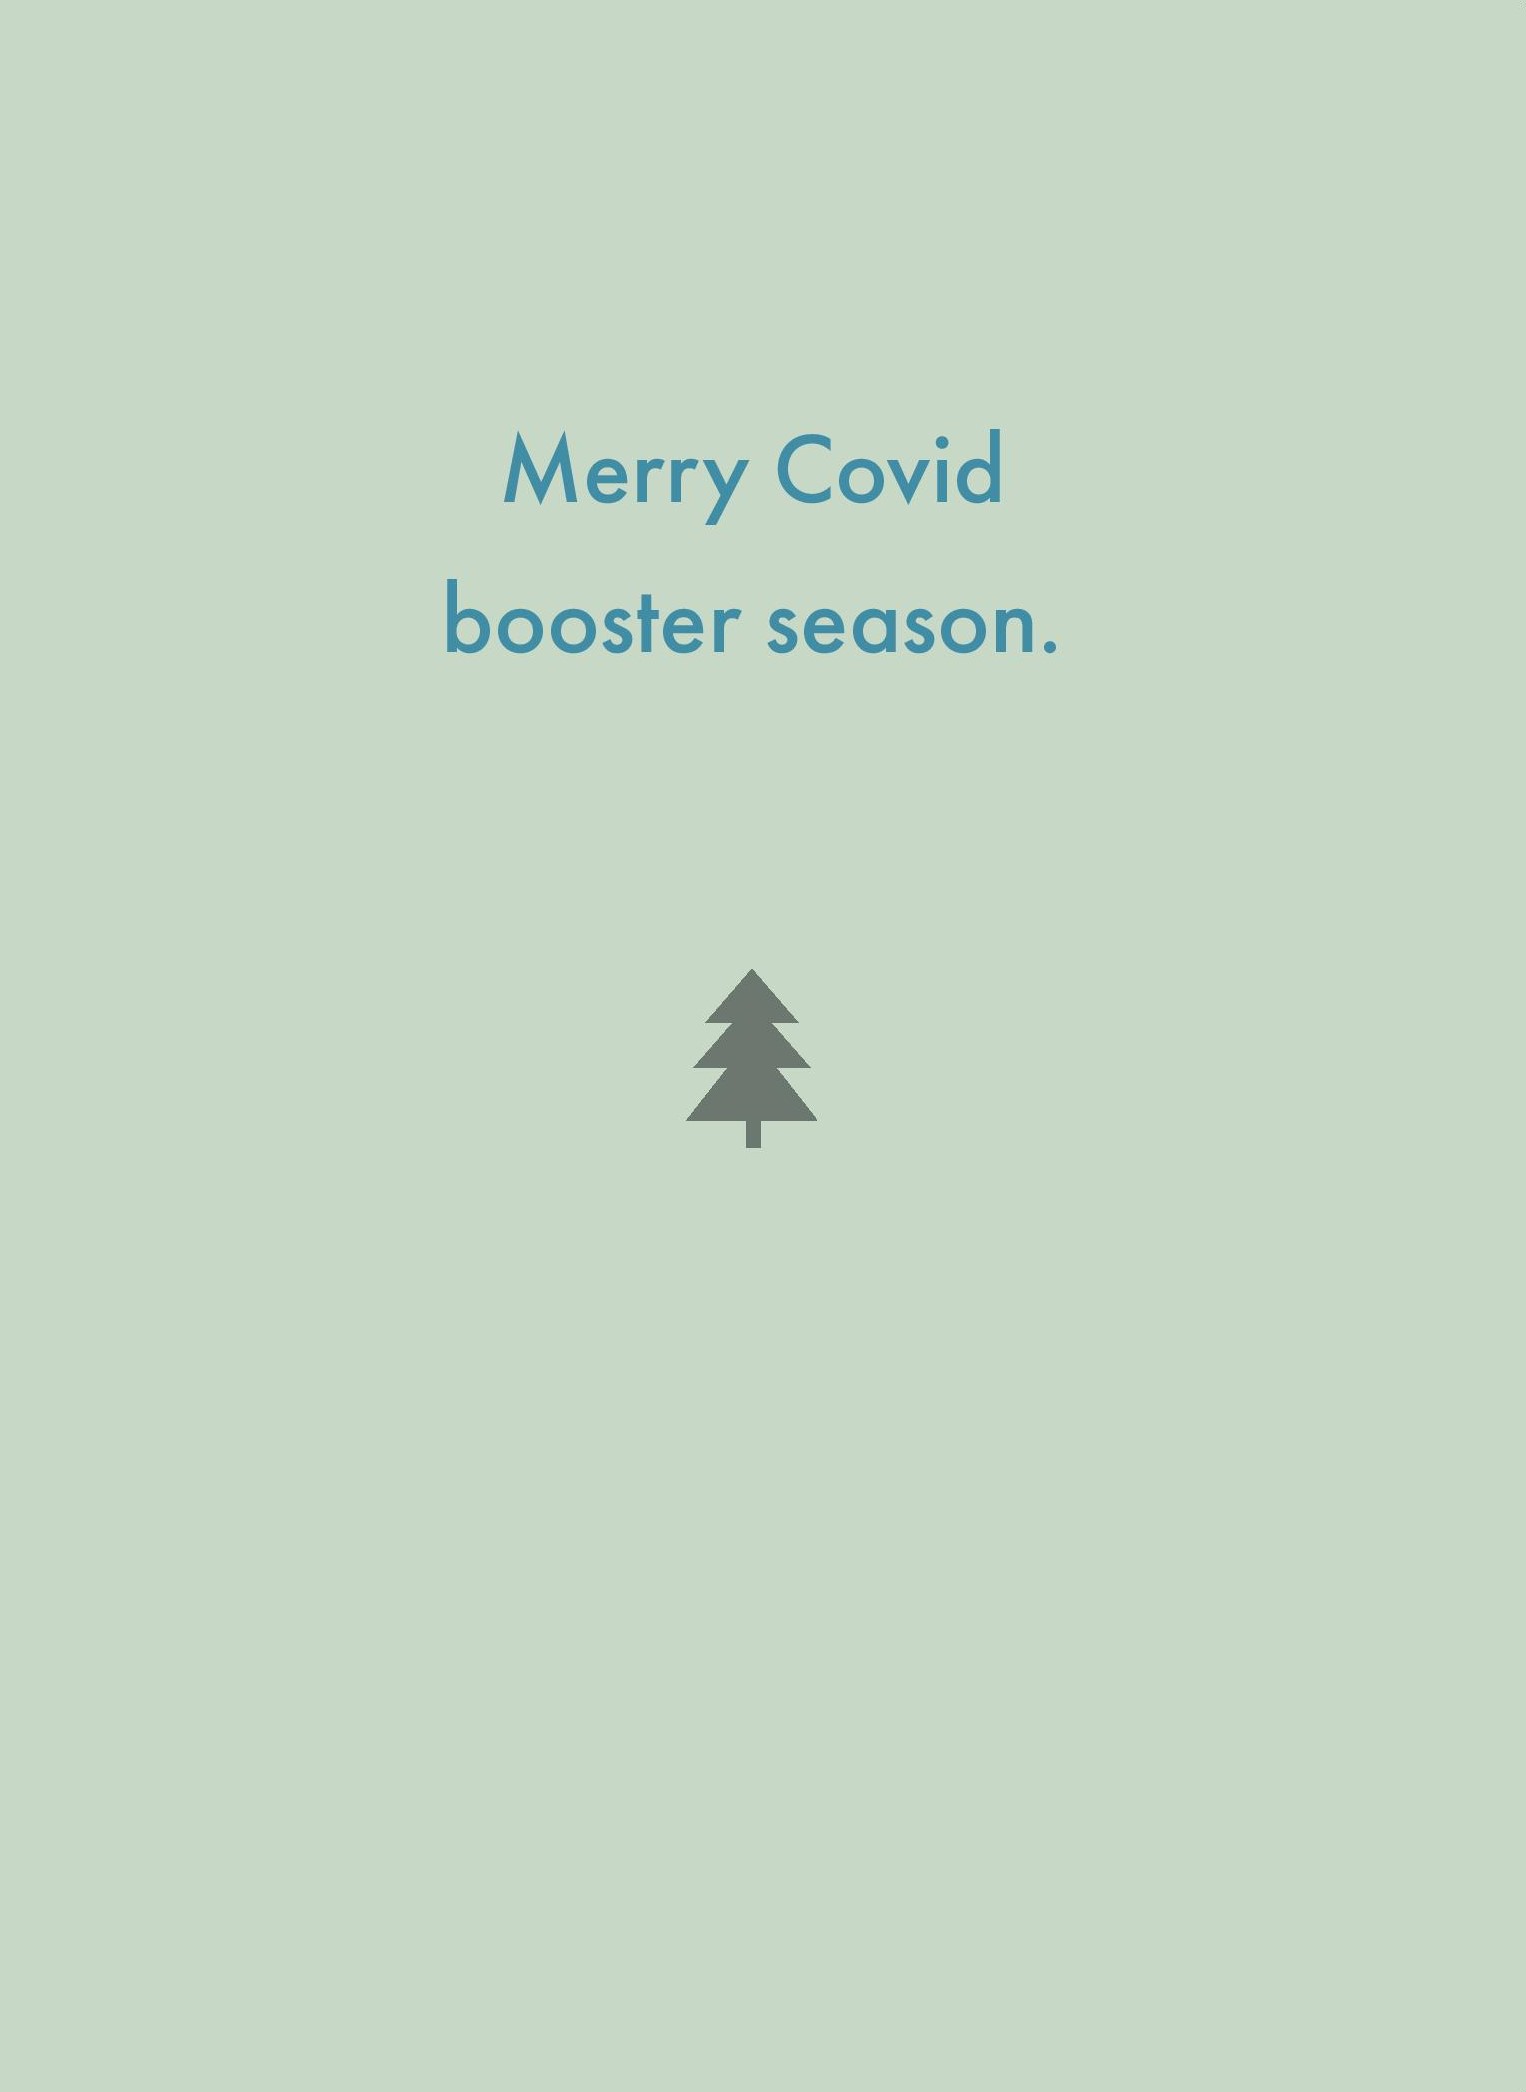 Above: A topical Christmas design from Deadpan Cards.